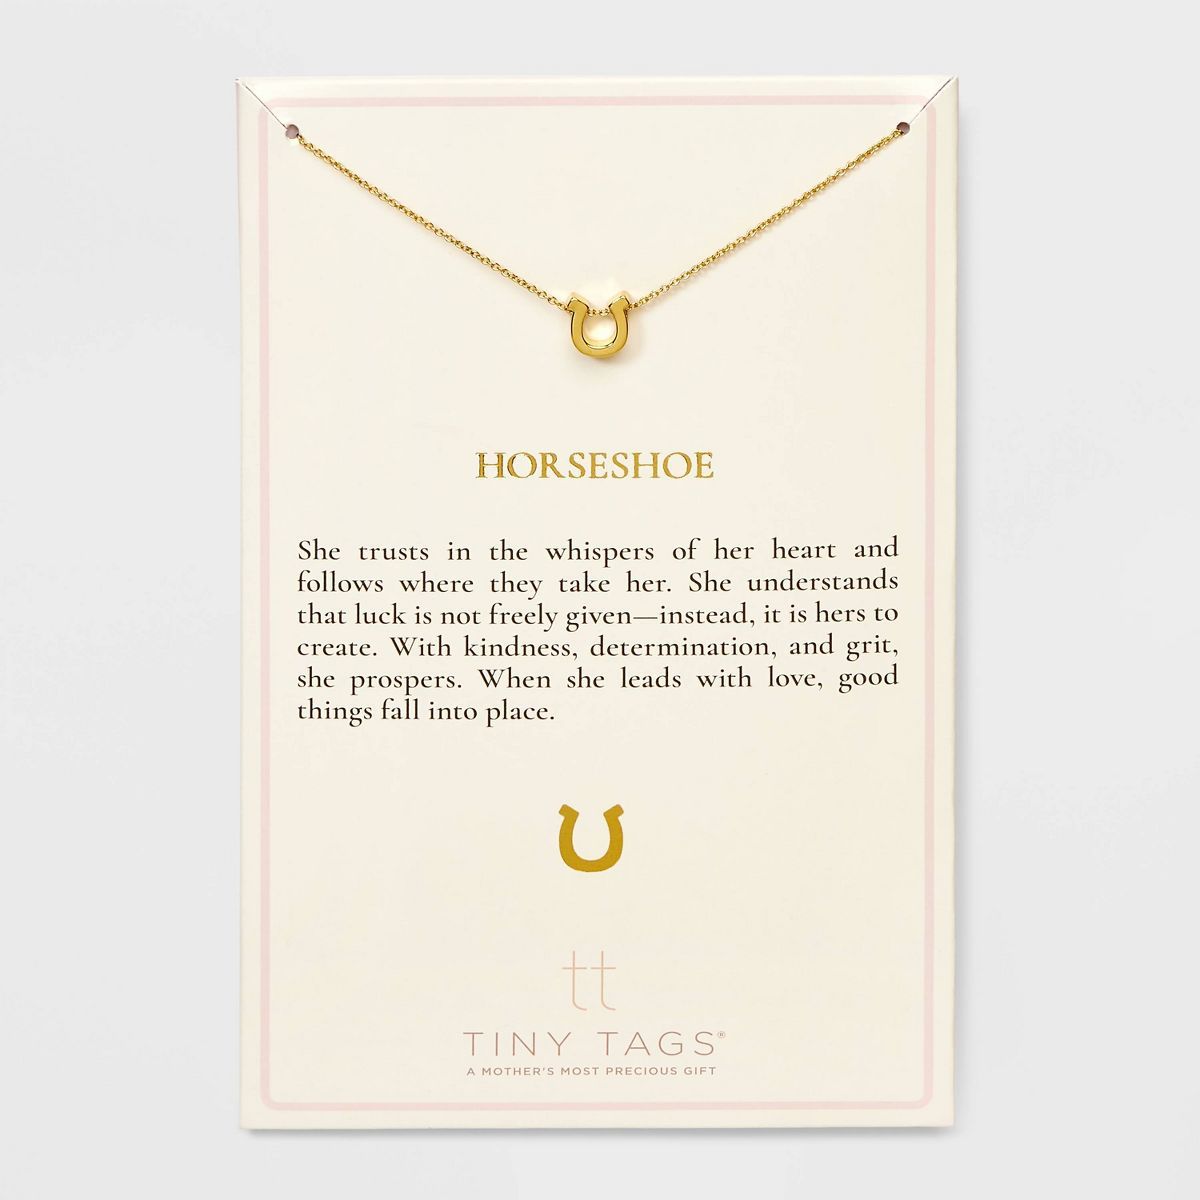 Tiny Tags 14K Gold Ion Plated Horseshoe Chain Necklace - Gold | Target